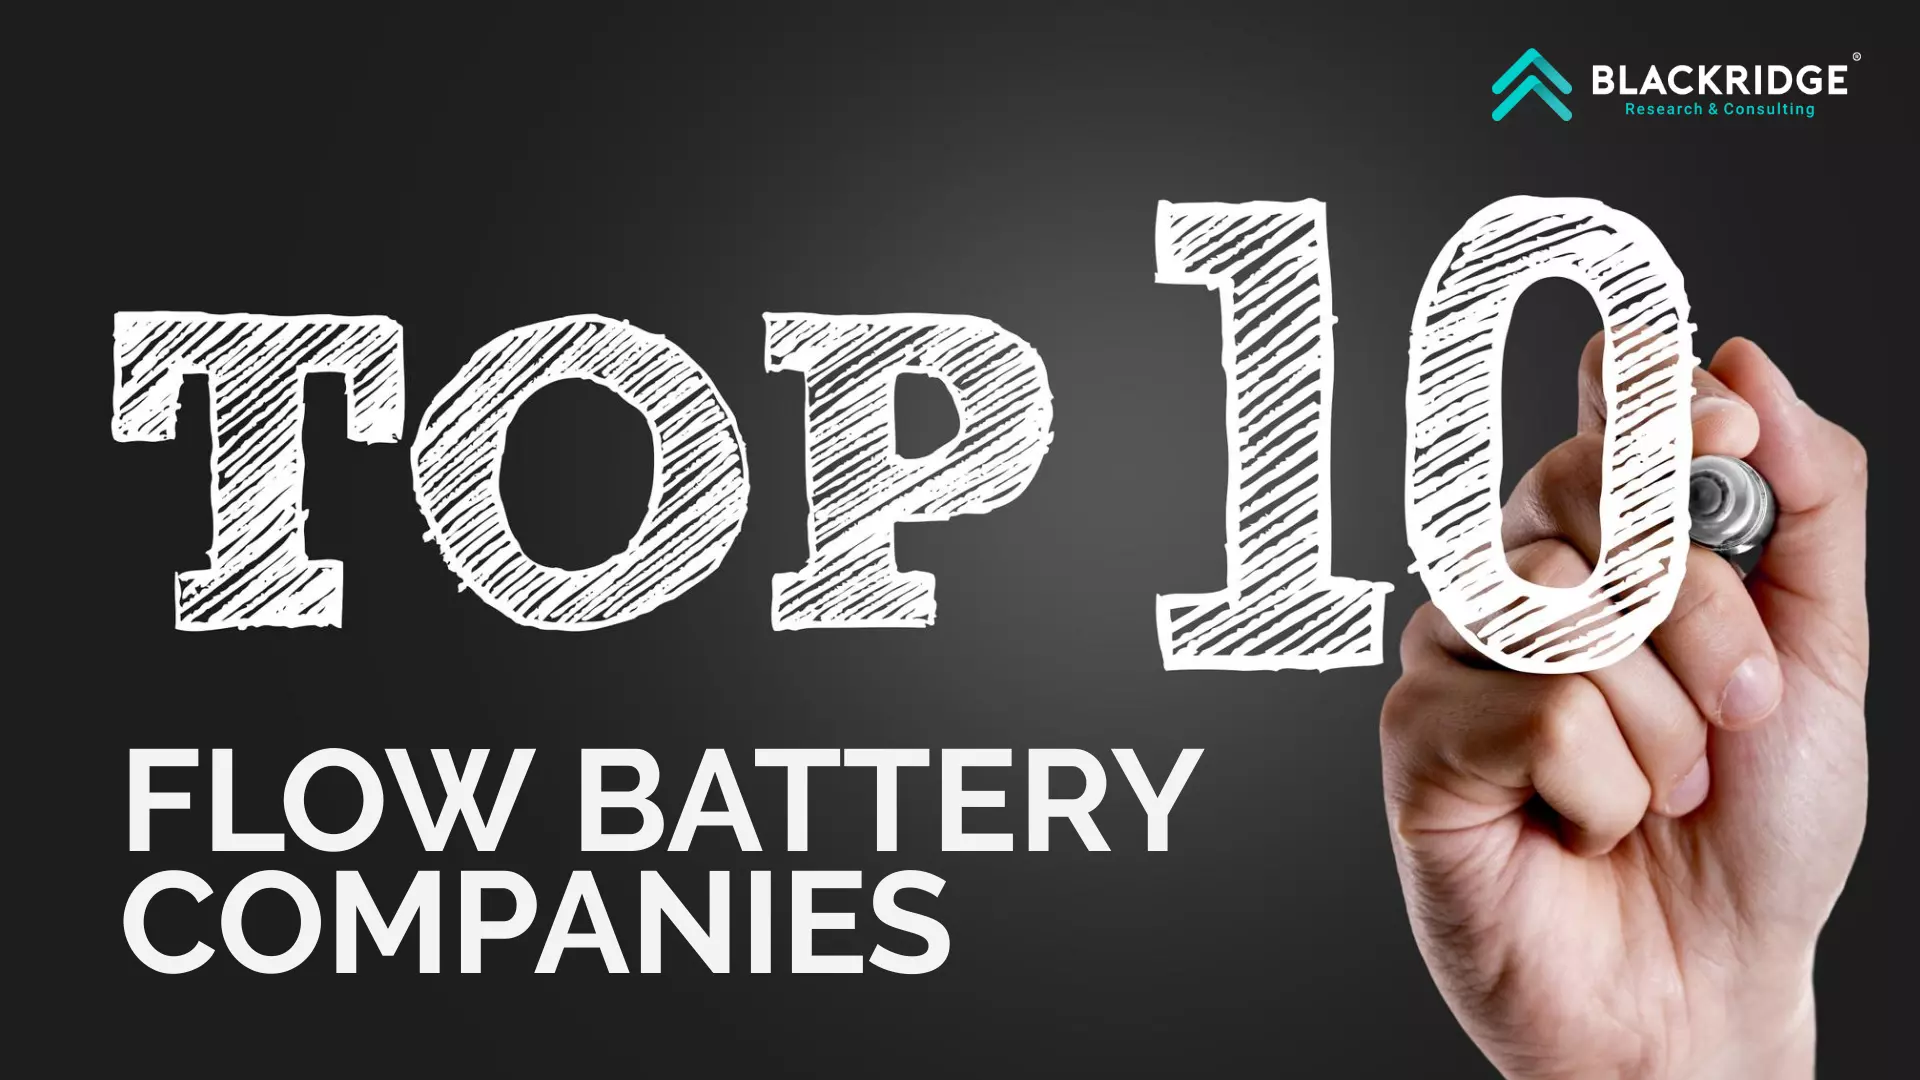 Here’s the Top 10 List of Flow Battery Companies 